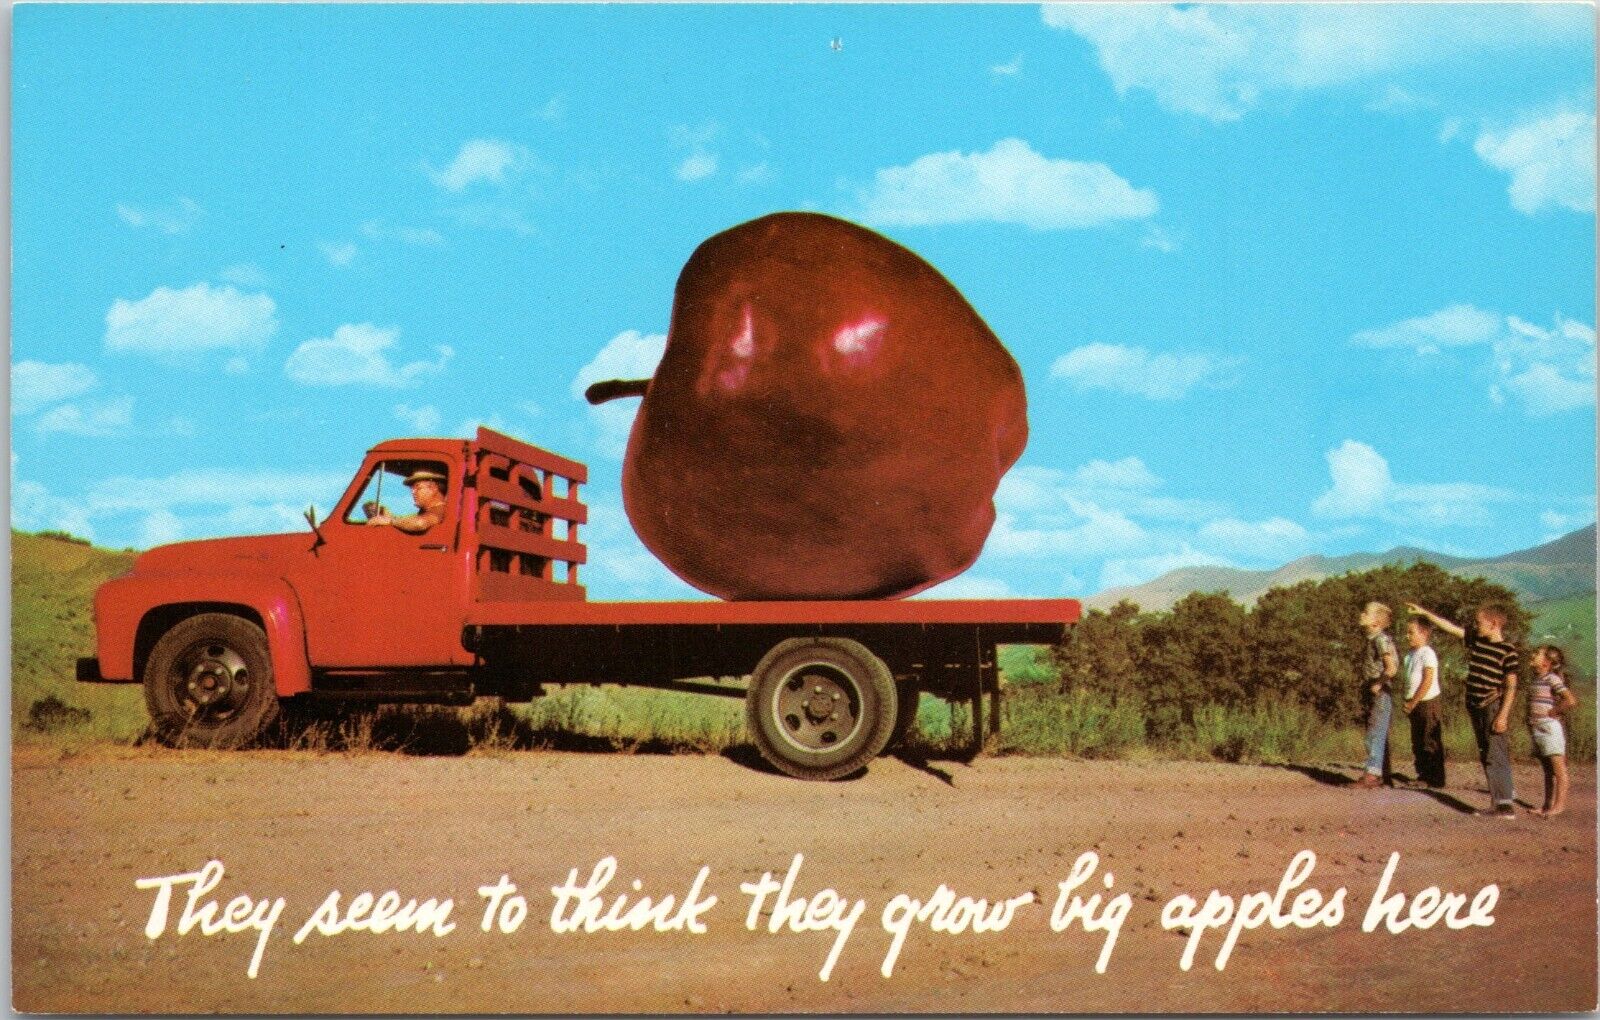 Exaggerated Apple on Flatbed Truck - Kids Amazed - Fantasy Chrome Postcard